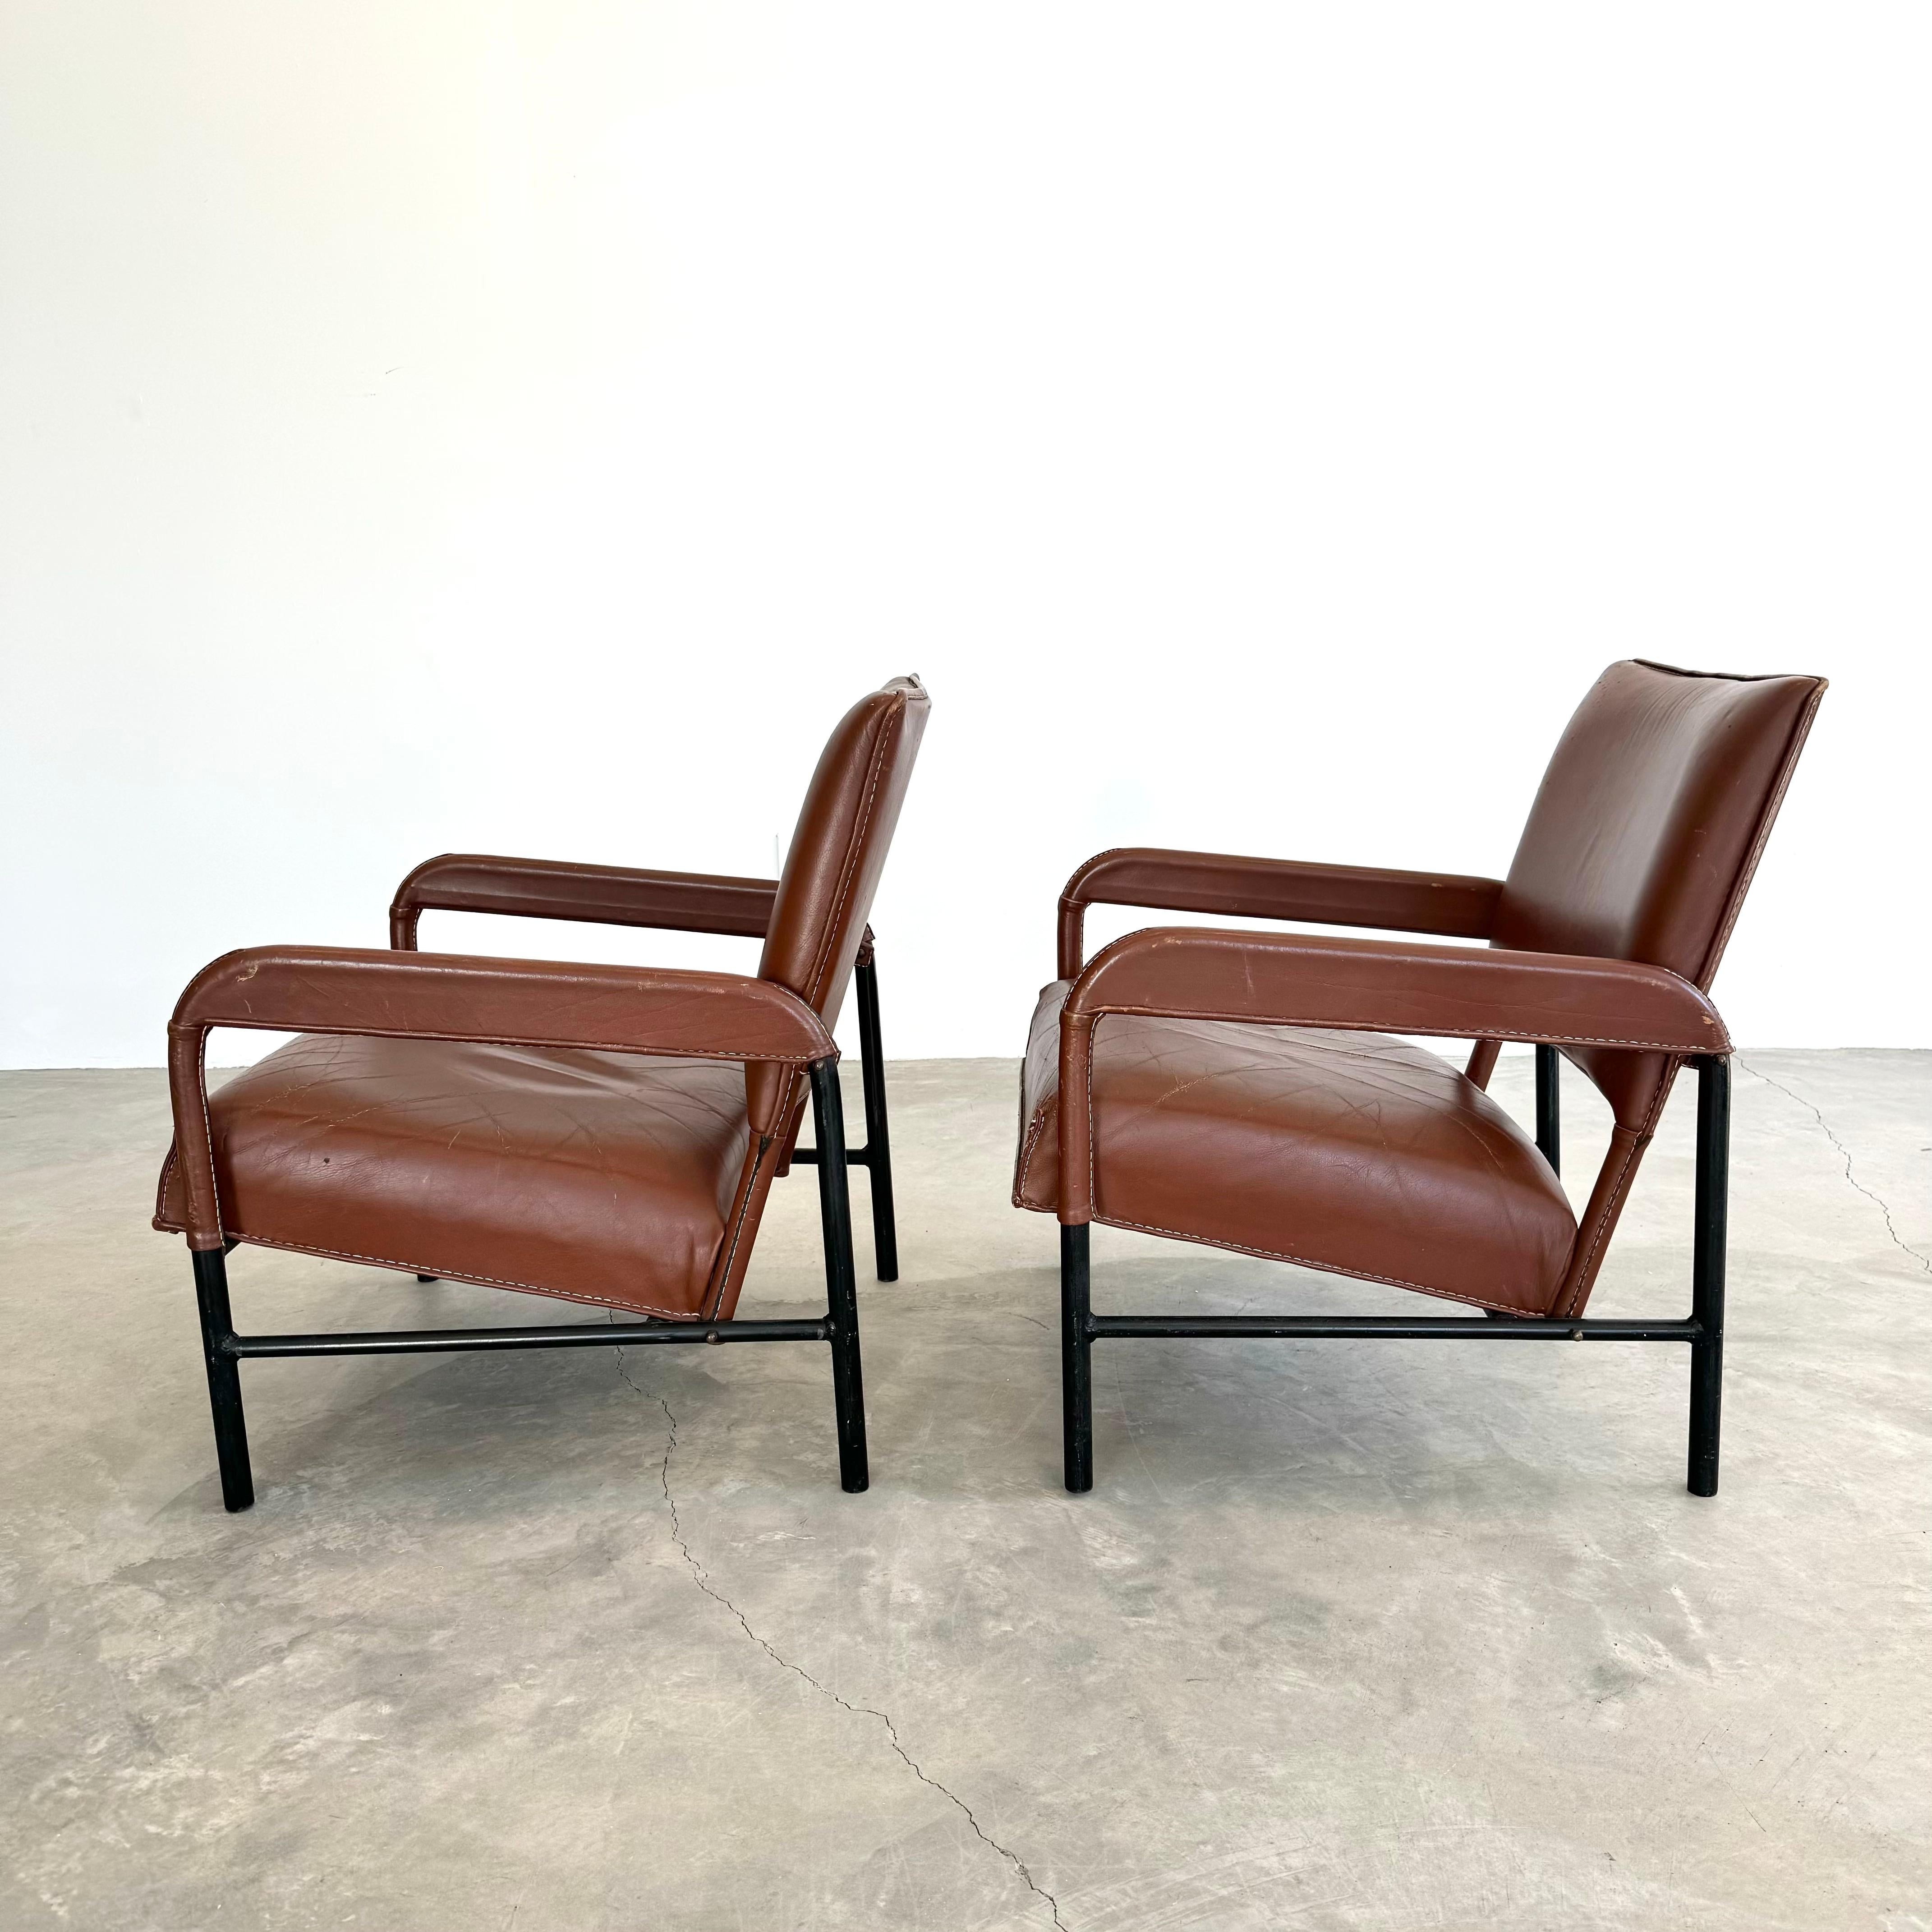 Pair of Saddle Leather and Iron Armchairs by Jacques Adnet, 1950s France For Sale 2